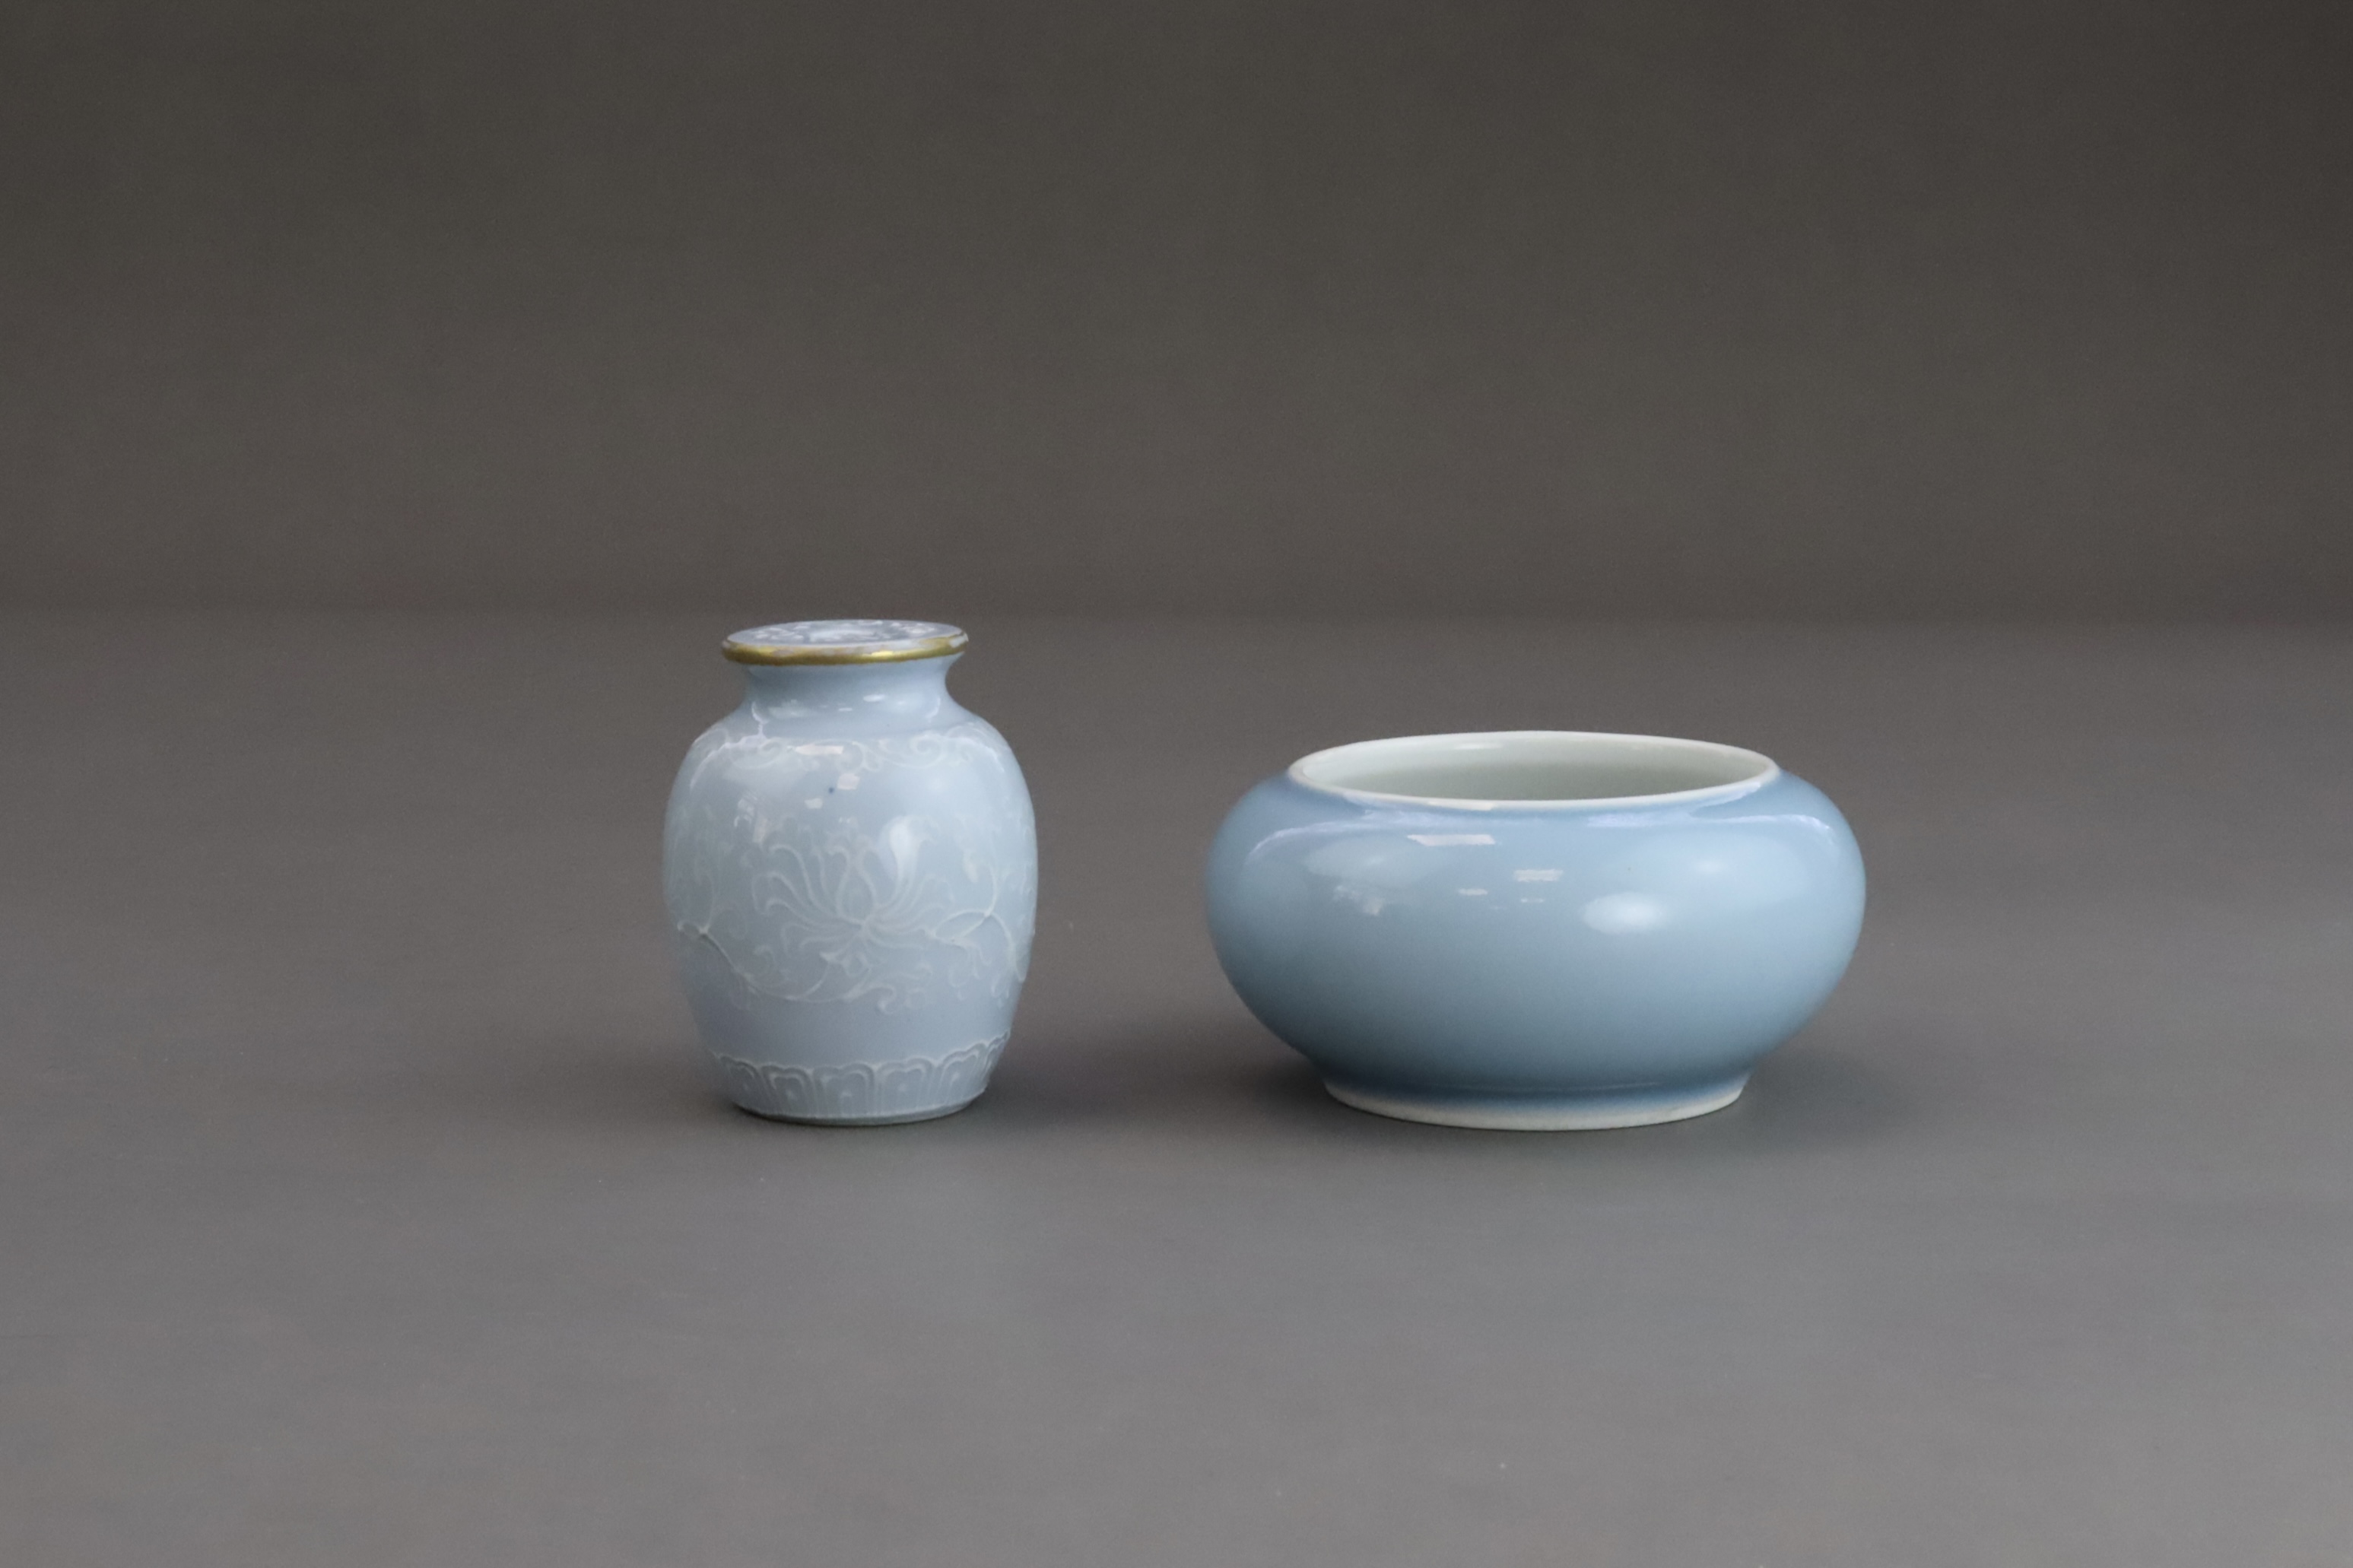  'Clair de lune': A Brushwasher, Guangxu mark and period, and a Moulded small Jar, Qing dynasty - Bild 5 aus 7